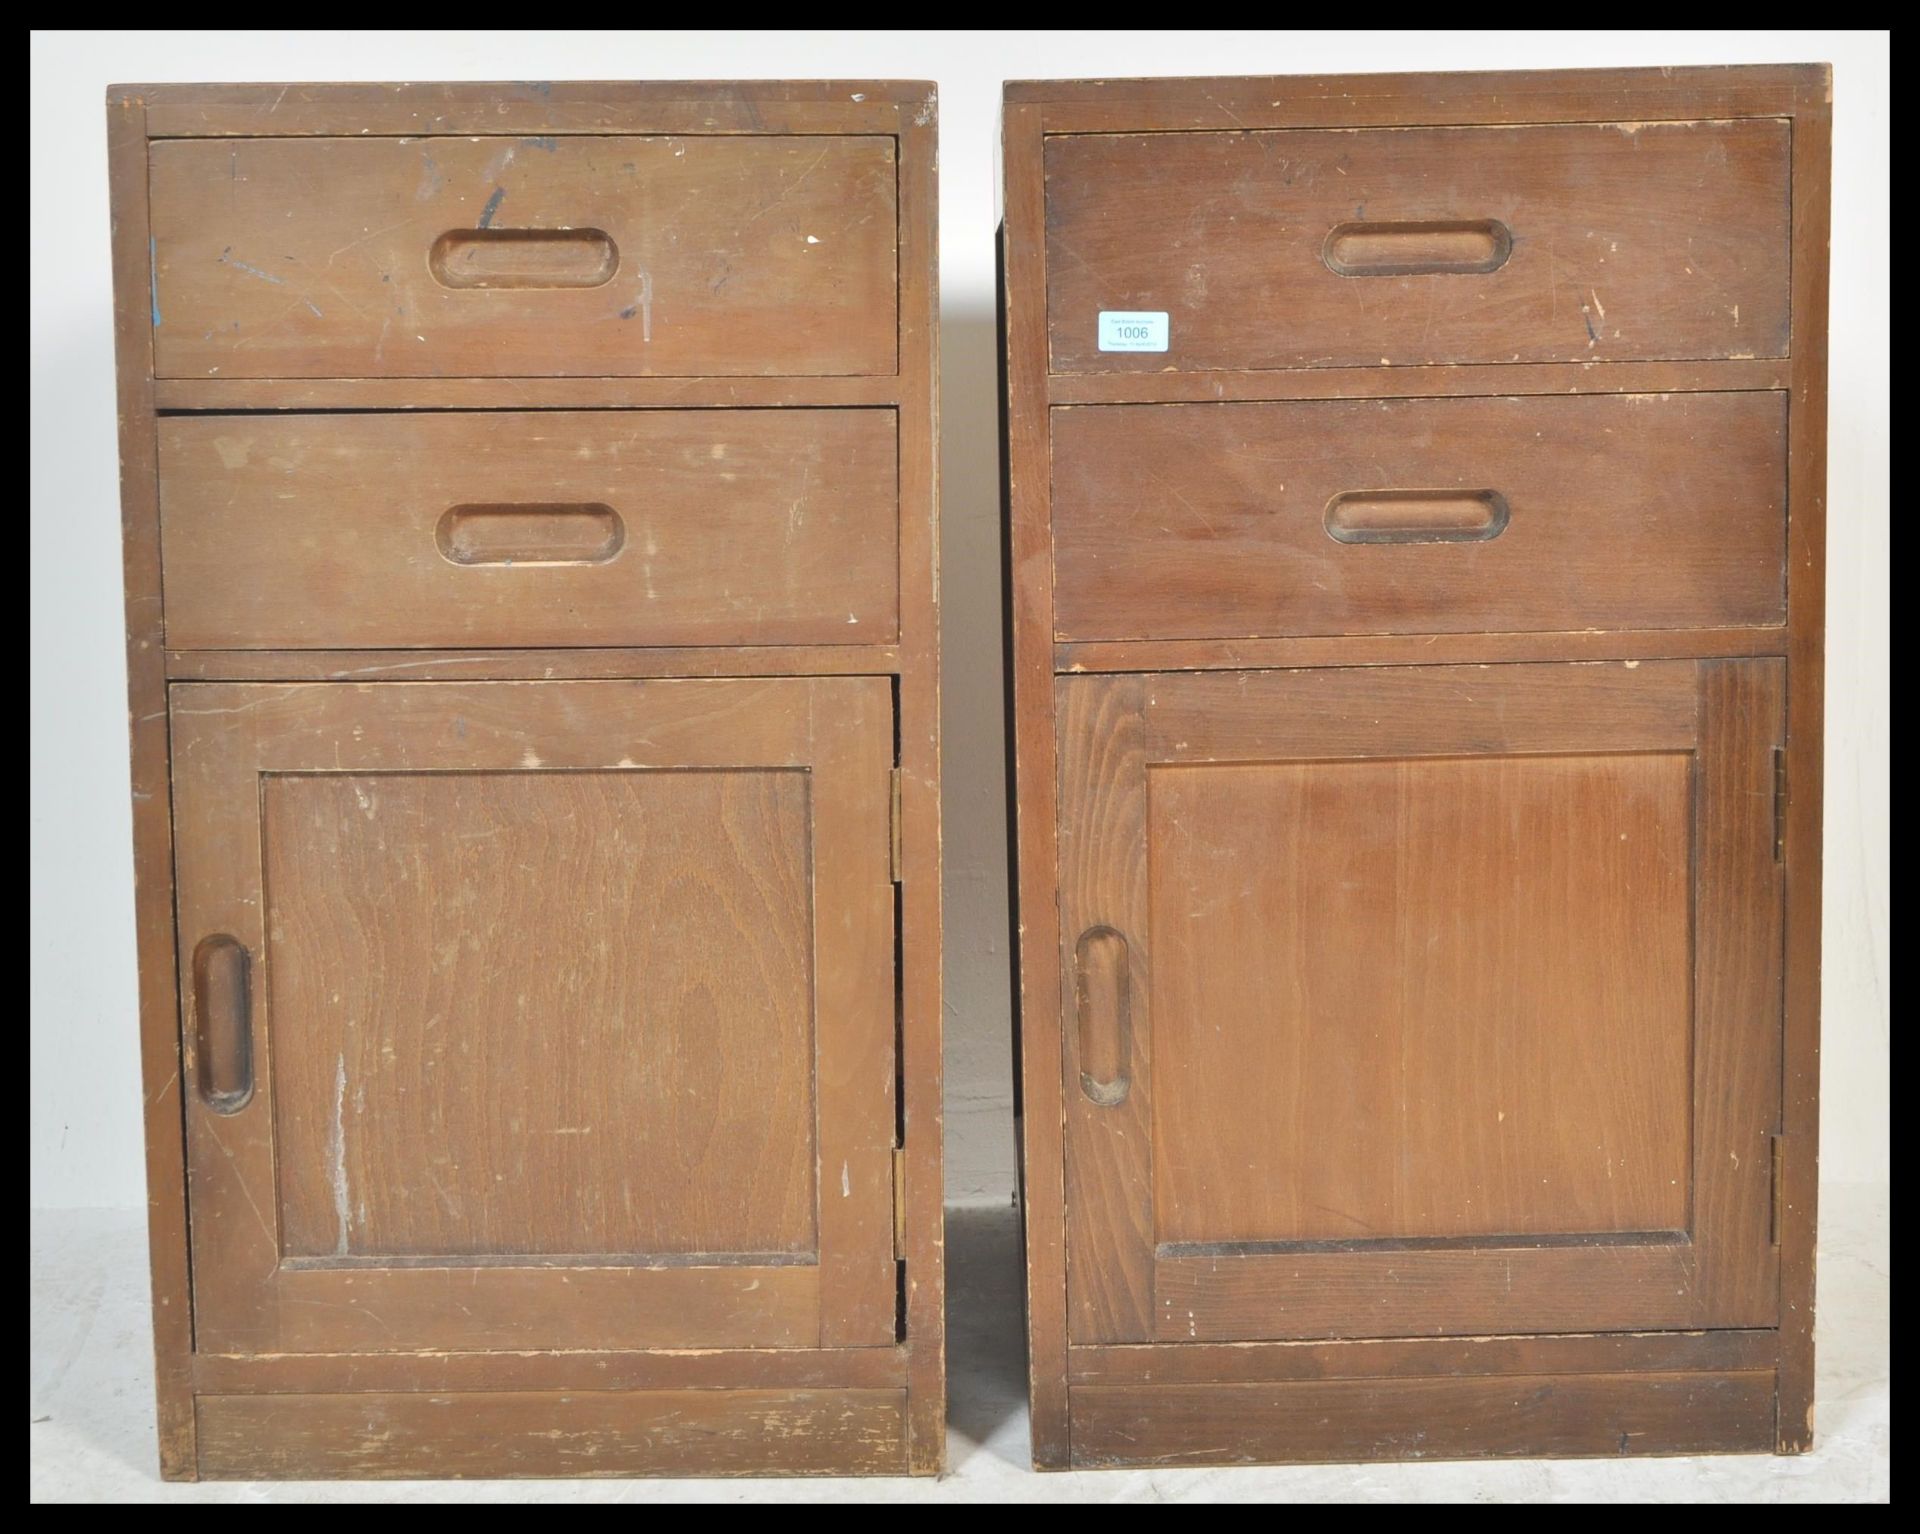 A pair of vintage 20th Century military bedside locker cabinets having a configuration of two